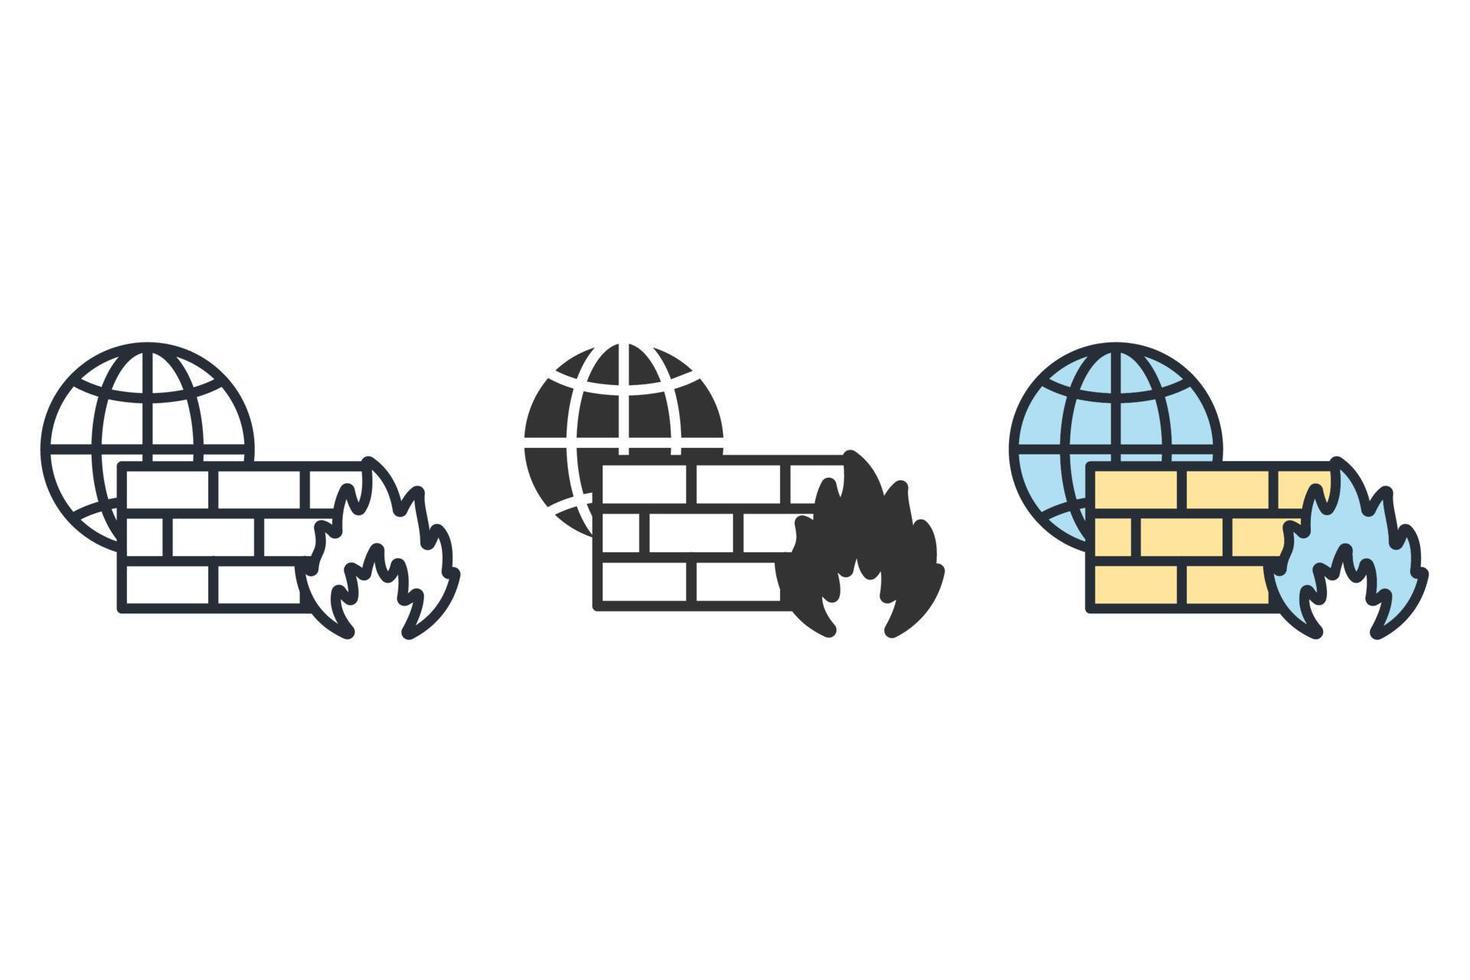 Firewall icons  symbol vector elements for infographic web